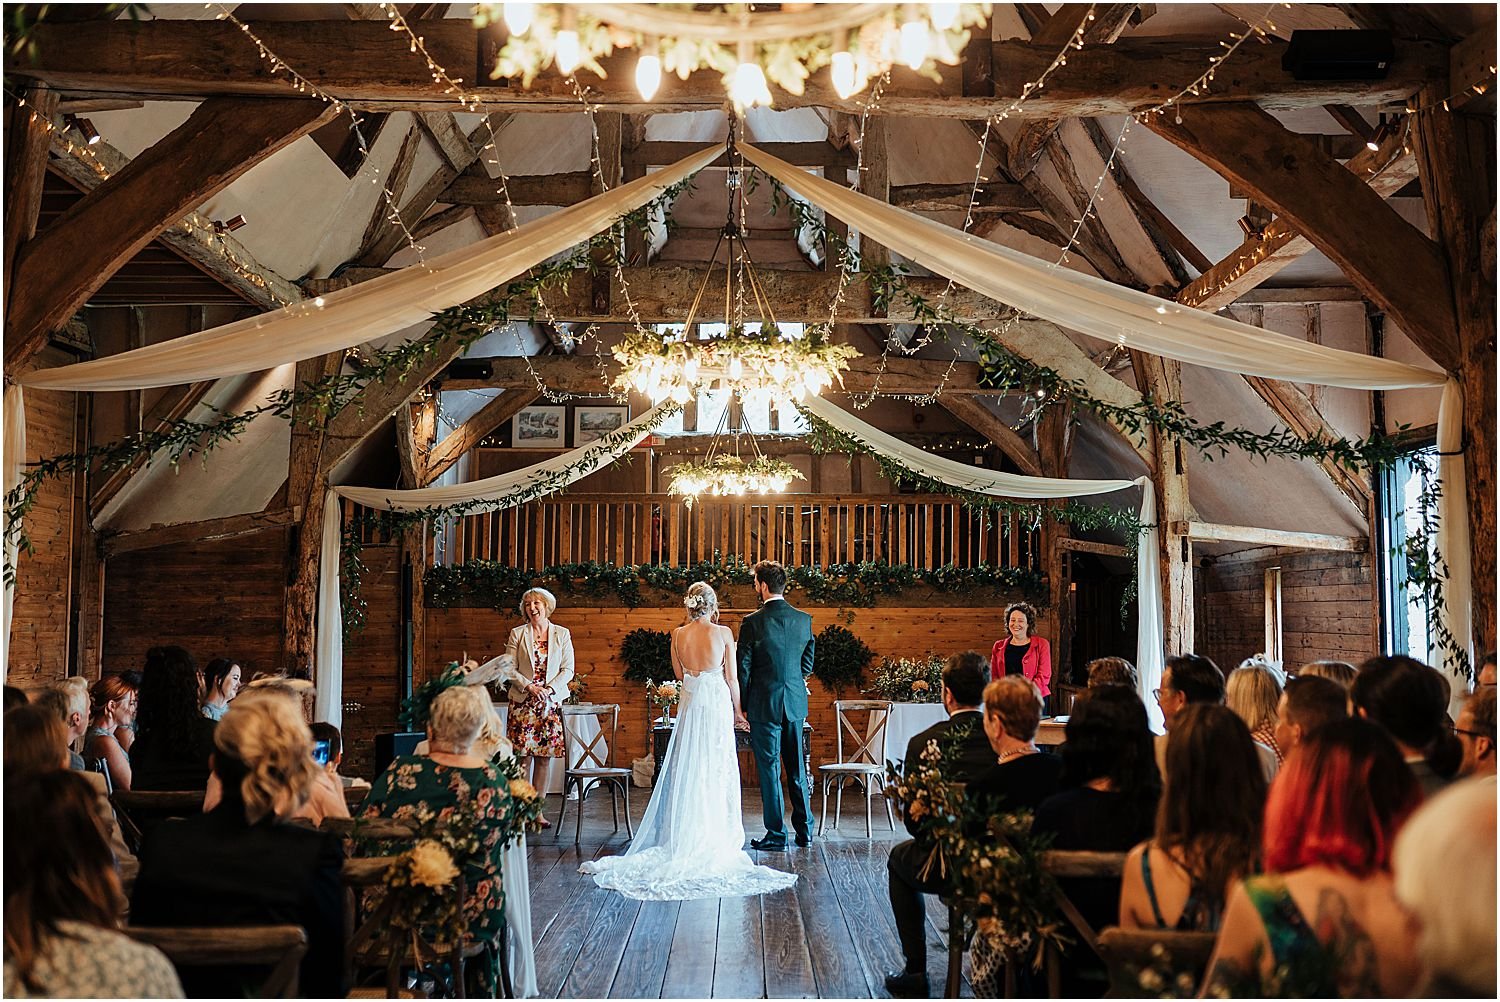 Bride and groom during wedding ceremony at Lains Barn